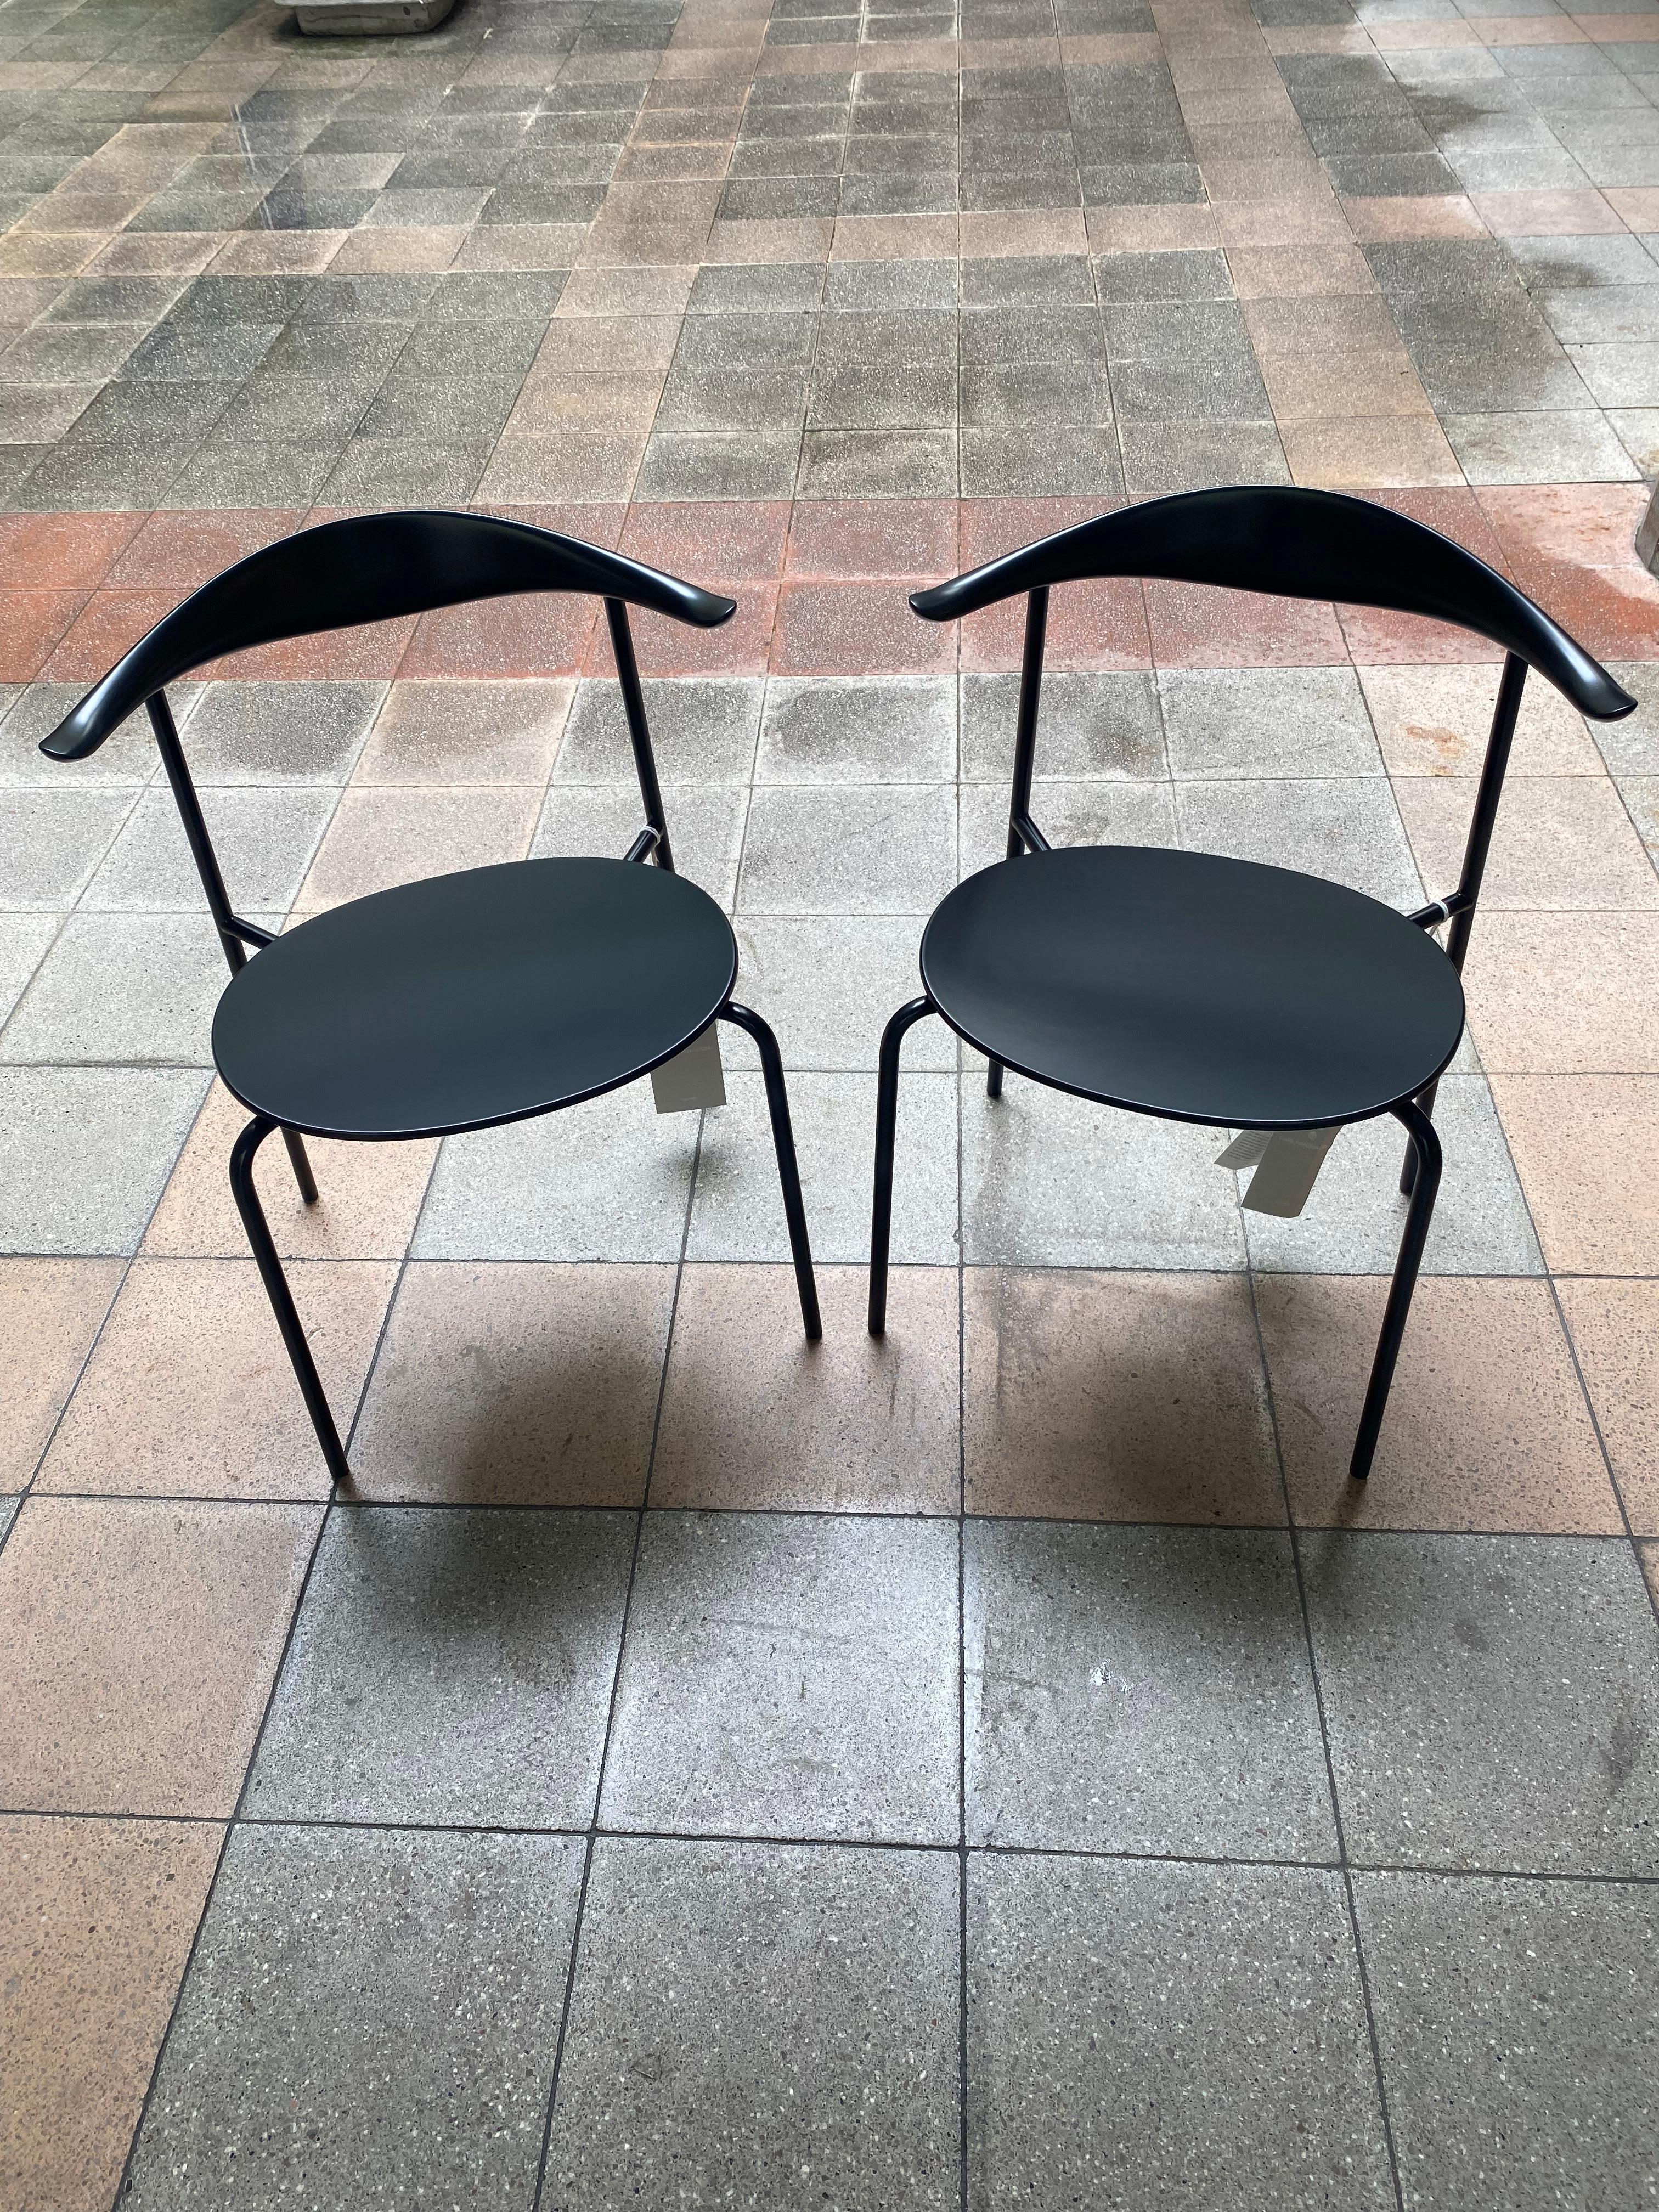 Carl Hansen & Sons
Pair of CH 88 P chairs
Black steel and oak
Design Hans J Wegner
New with tags
Dimensions chairs: 57 x 76.5 x 44.5.